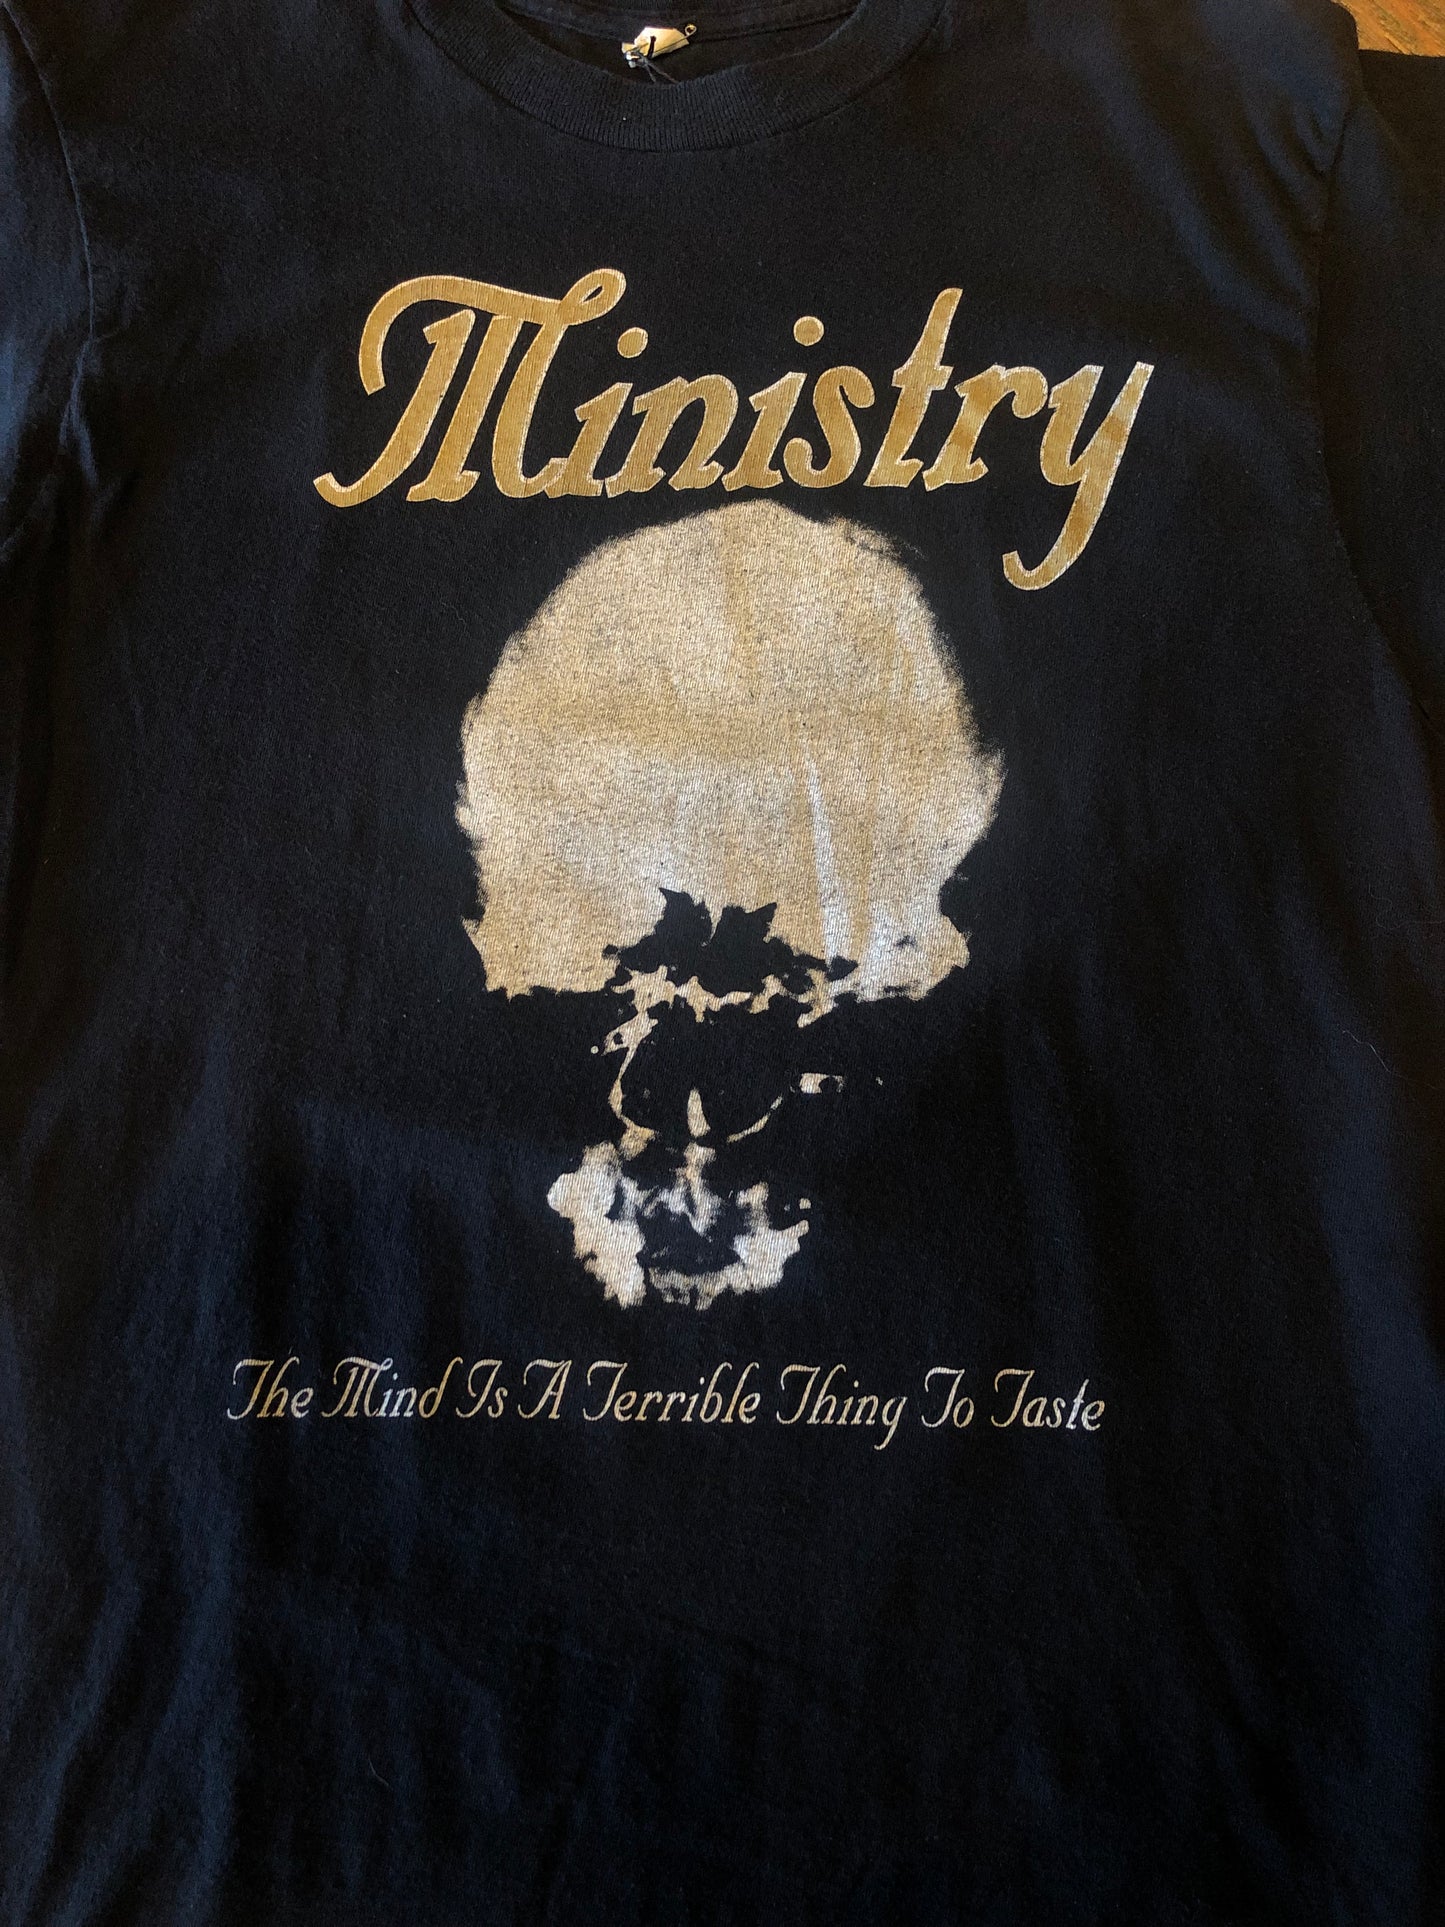 Vintage Ministry 1992 “The Mind is a Terrible Thing to Waste” Euro Tour Merch T-Shirt